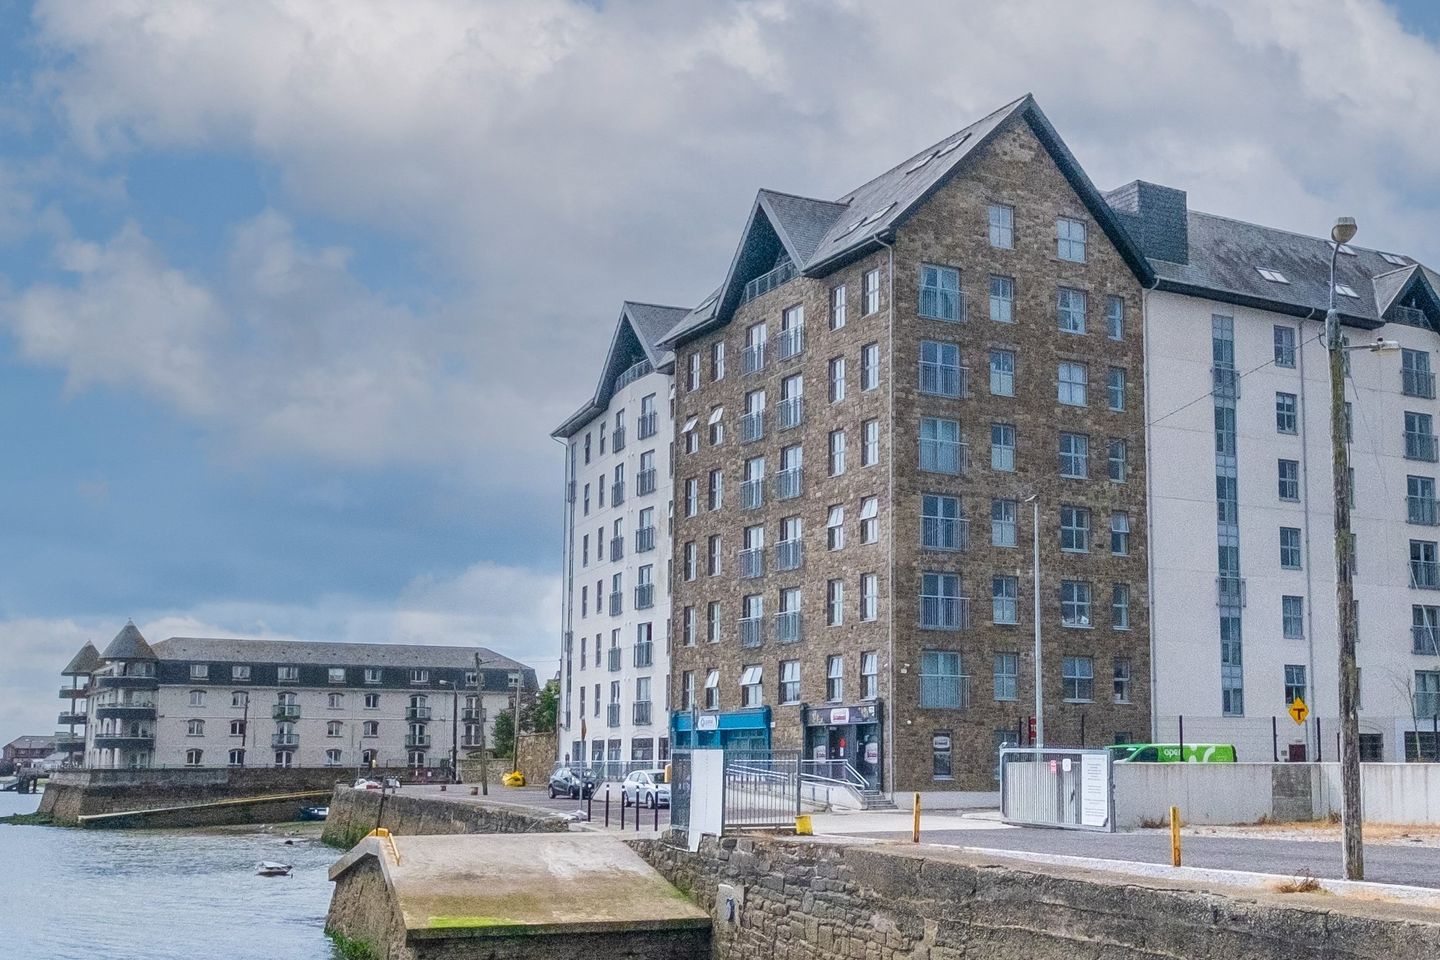 604 Pier Head Apartments, Store Street, Youghal, Co. Cork, P36VX05